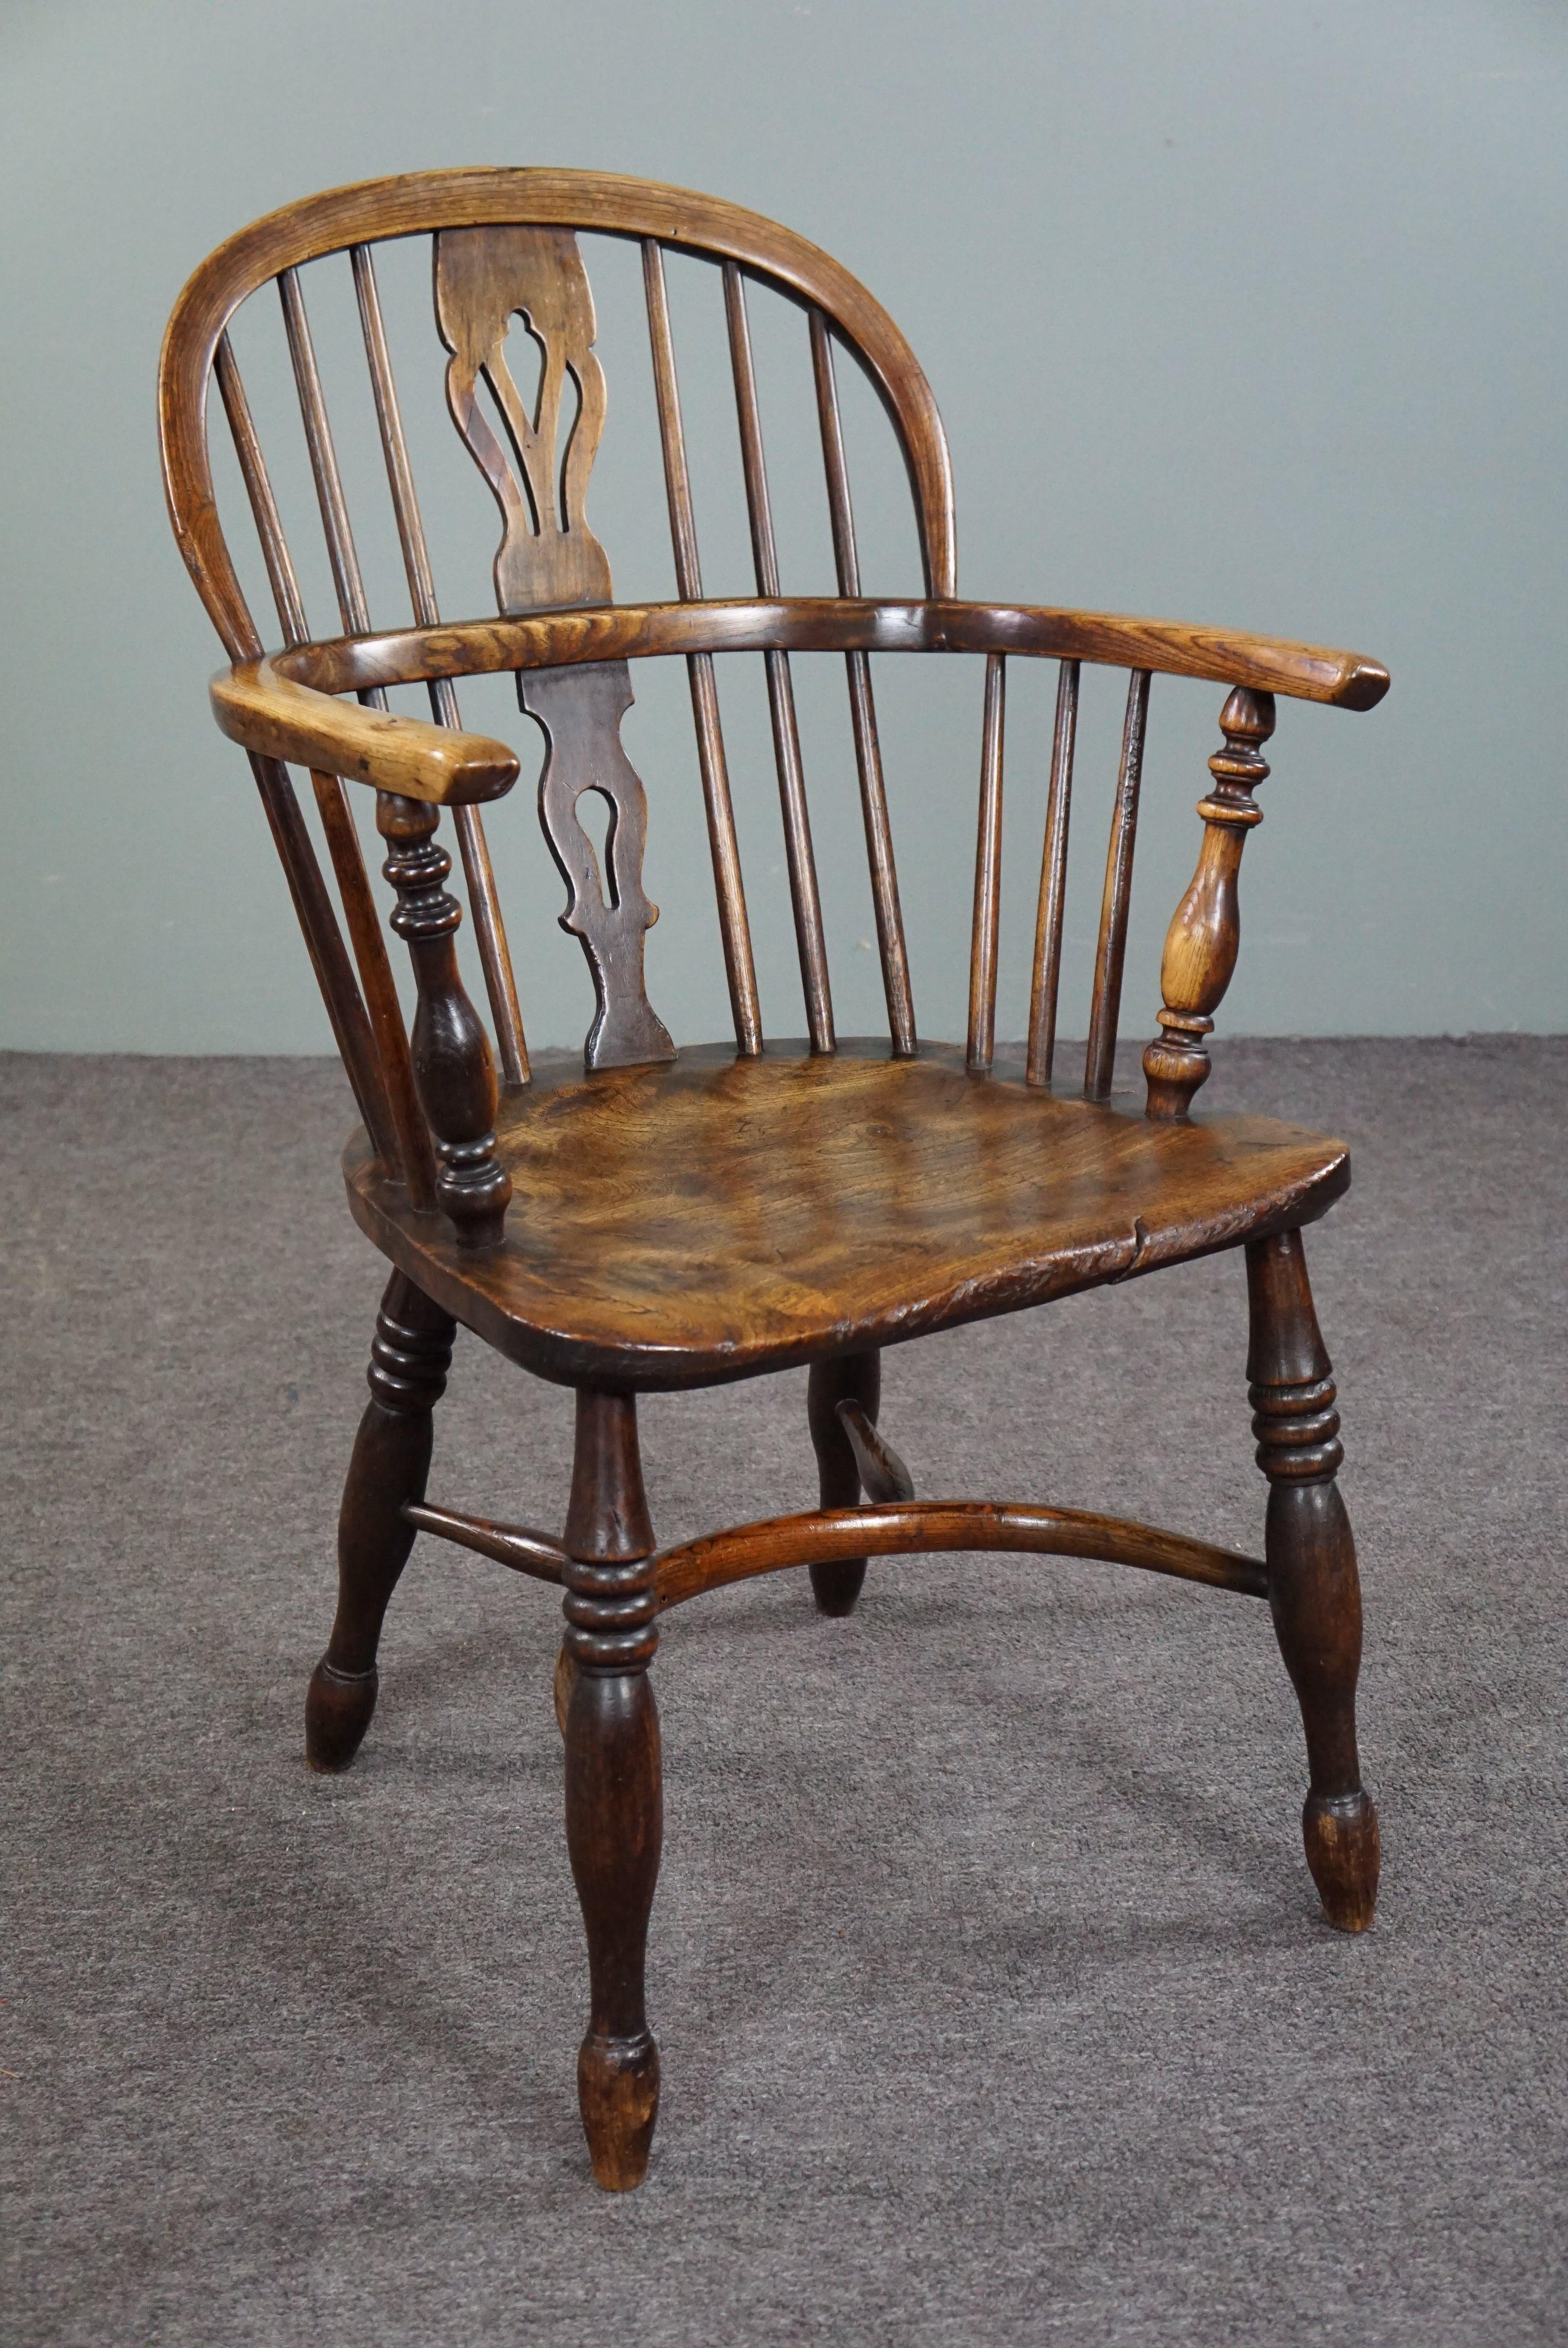 Offered is this beautiful antique armchair made of solid wood with a very beautiful characteristic appearance.

This very impressive English antique Windsor armchair with armrests has a well shaped thick solid wood seat. The chair has charming